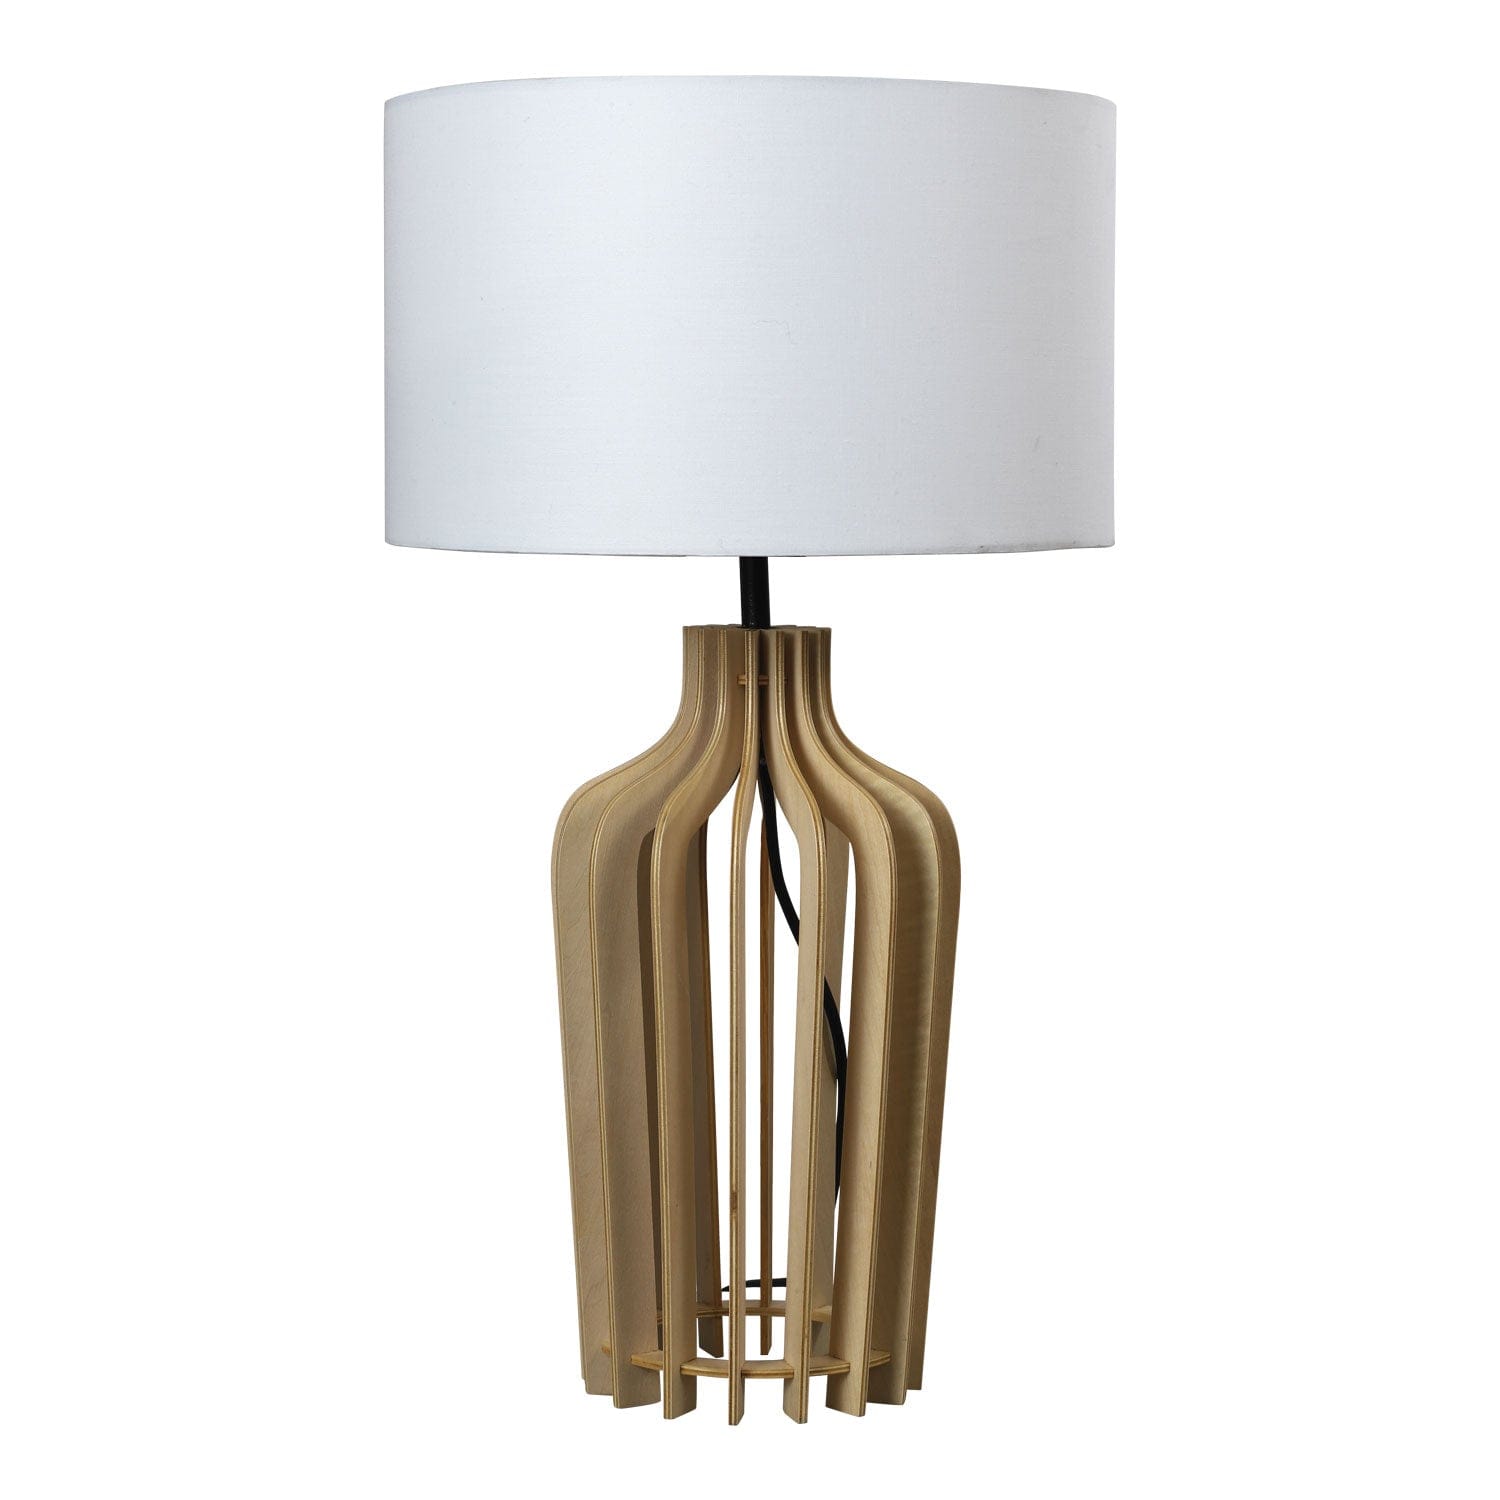 Domus Lighting Table Lamps Wood DOMUS SANDS-TL TIMBER TABLE LAMP 1XE27 Lights-For-You 22750